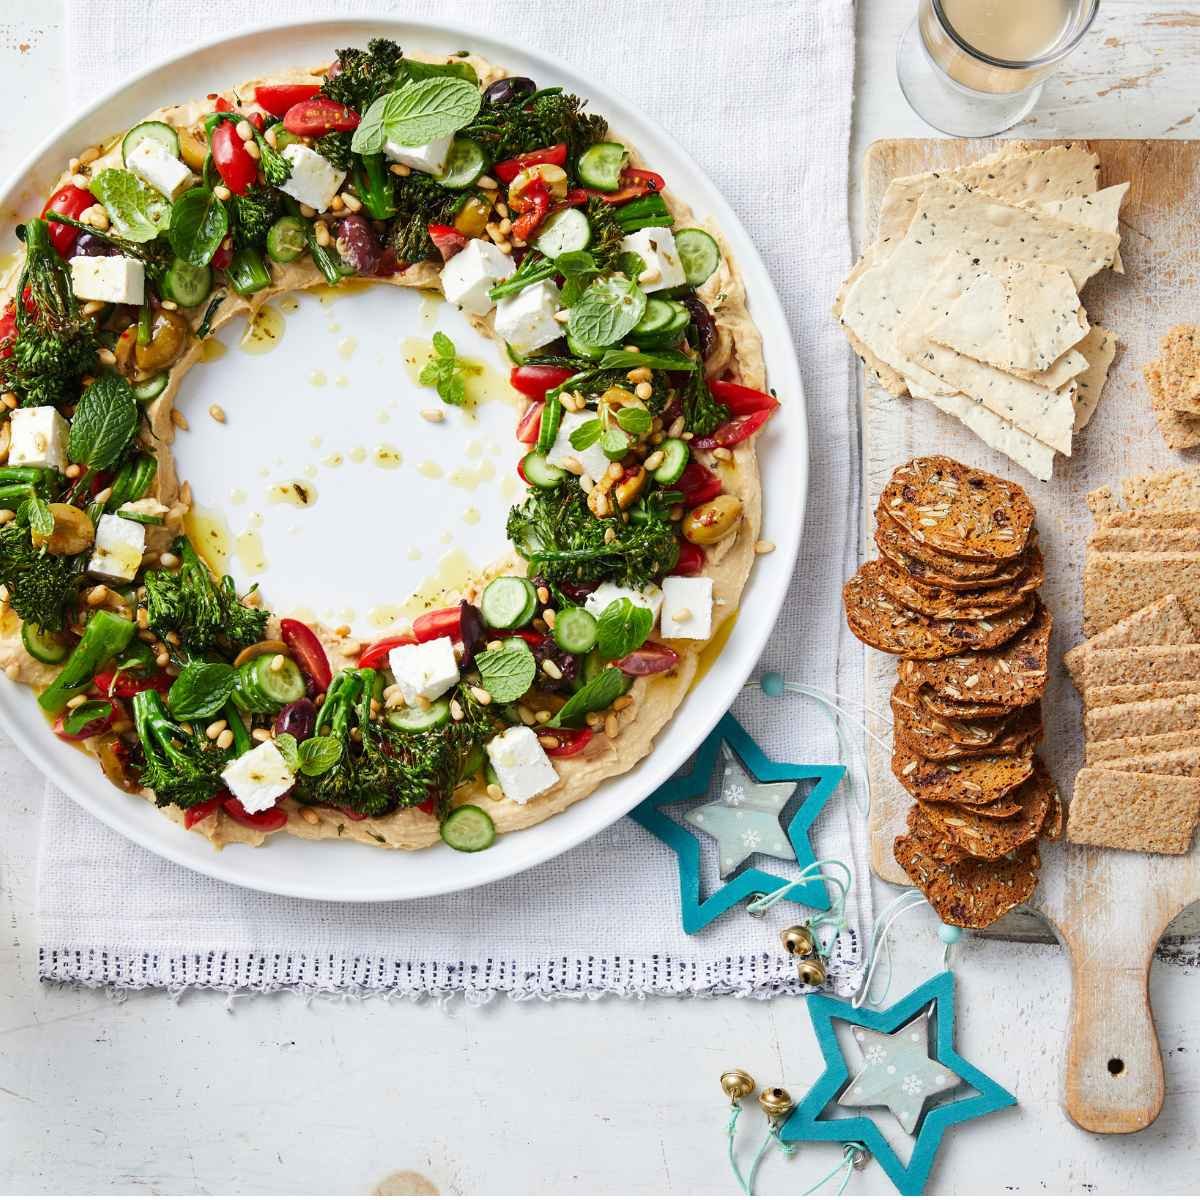 A holiday wreath on a white plate made out of hummus, topped with roasted broccolini,feta, olives and pine nuts.